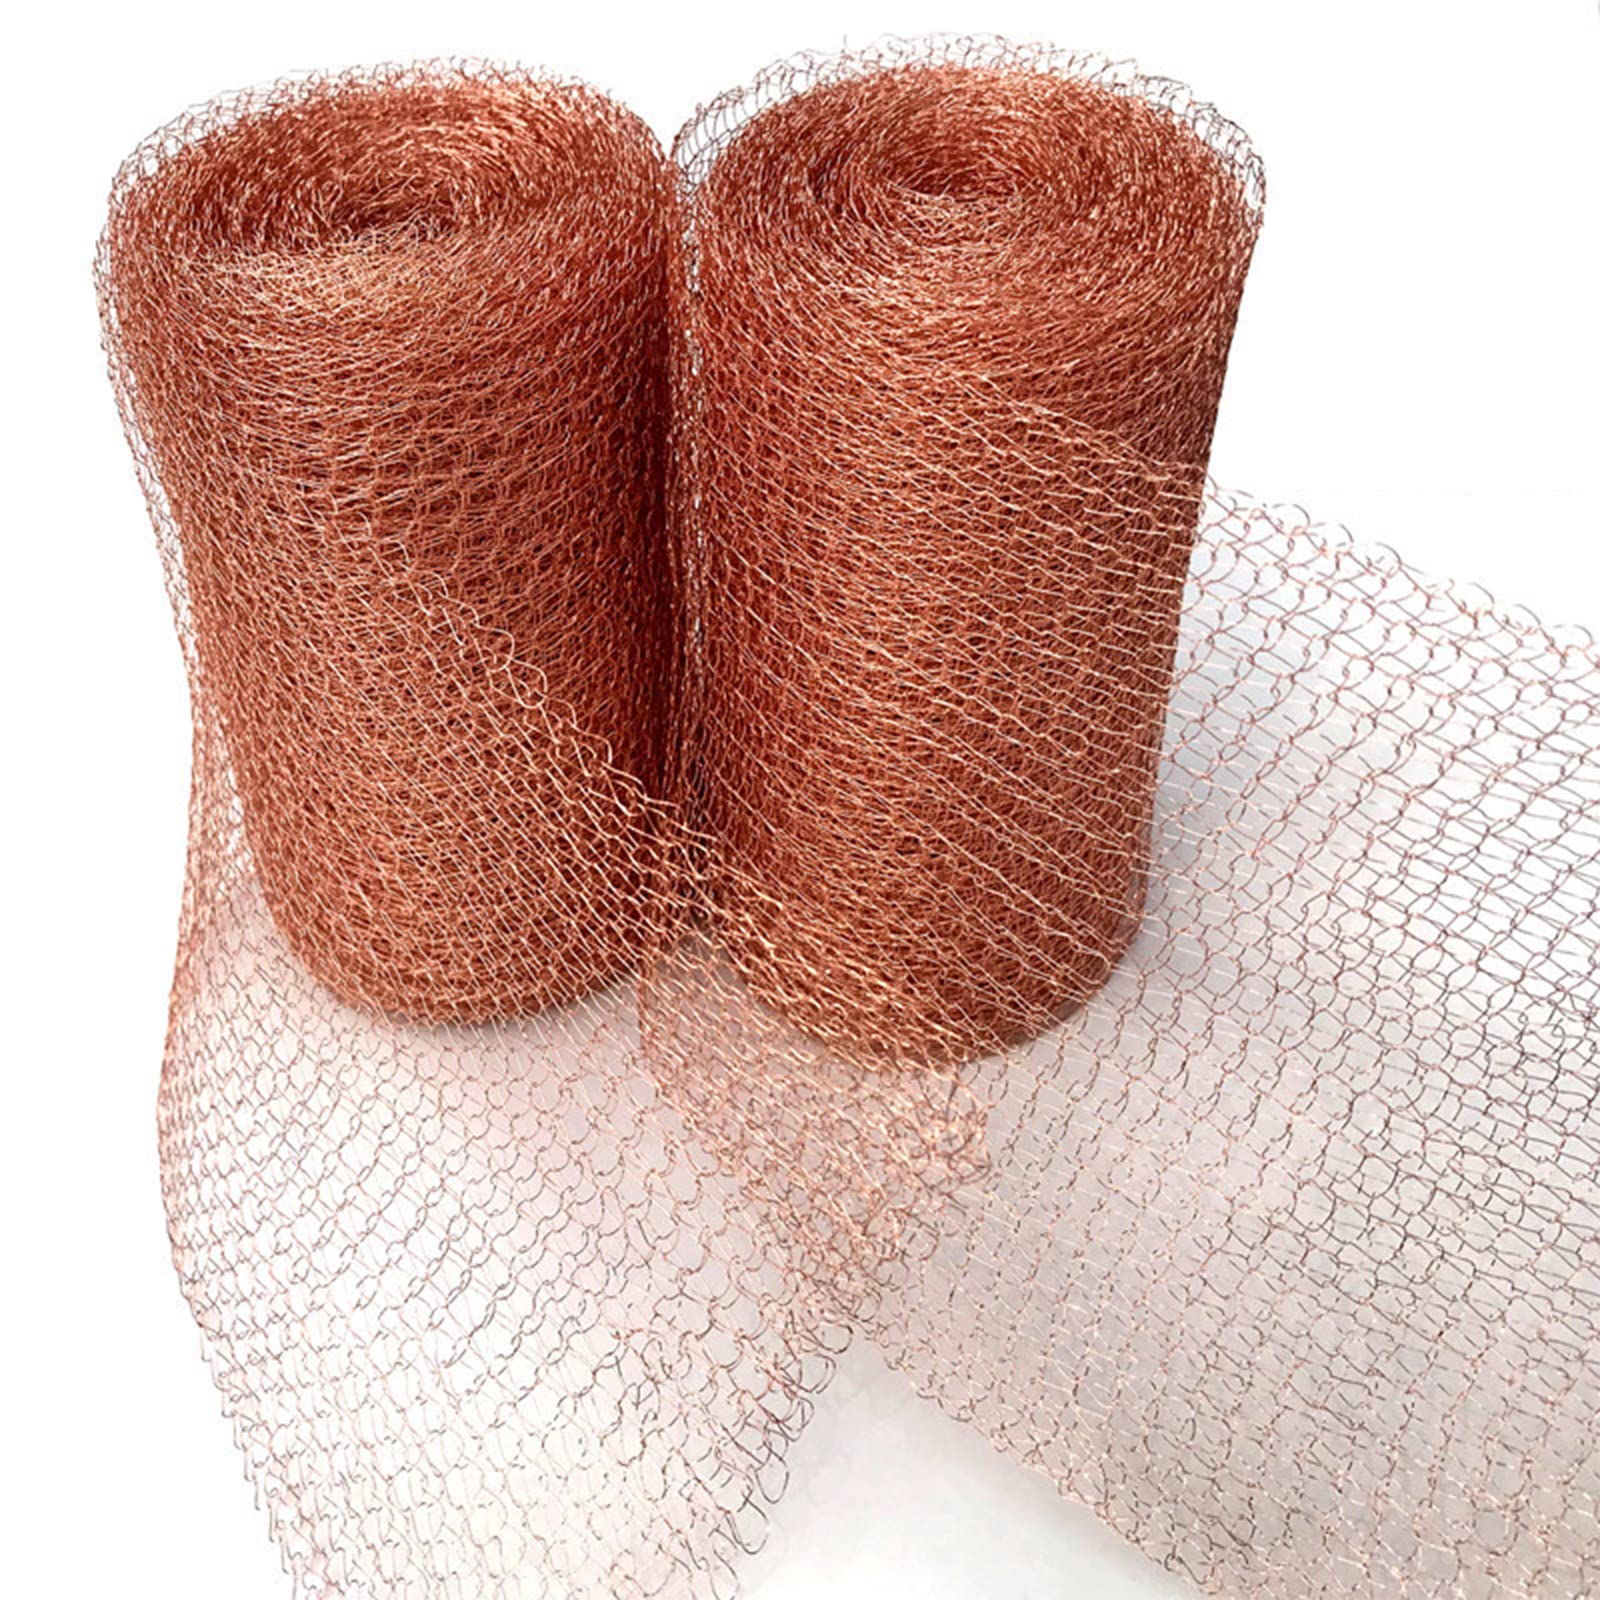 Copper Mesh Roll for Mice Rat Rodent Repellent, Sturdy Anti-Snail Trap Woven Copper Wire Shielding Filter Garden Yard, Copper Wool Mouse Trap for Bat Snail Bird Control with Packing Tool (5in*3m)